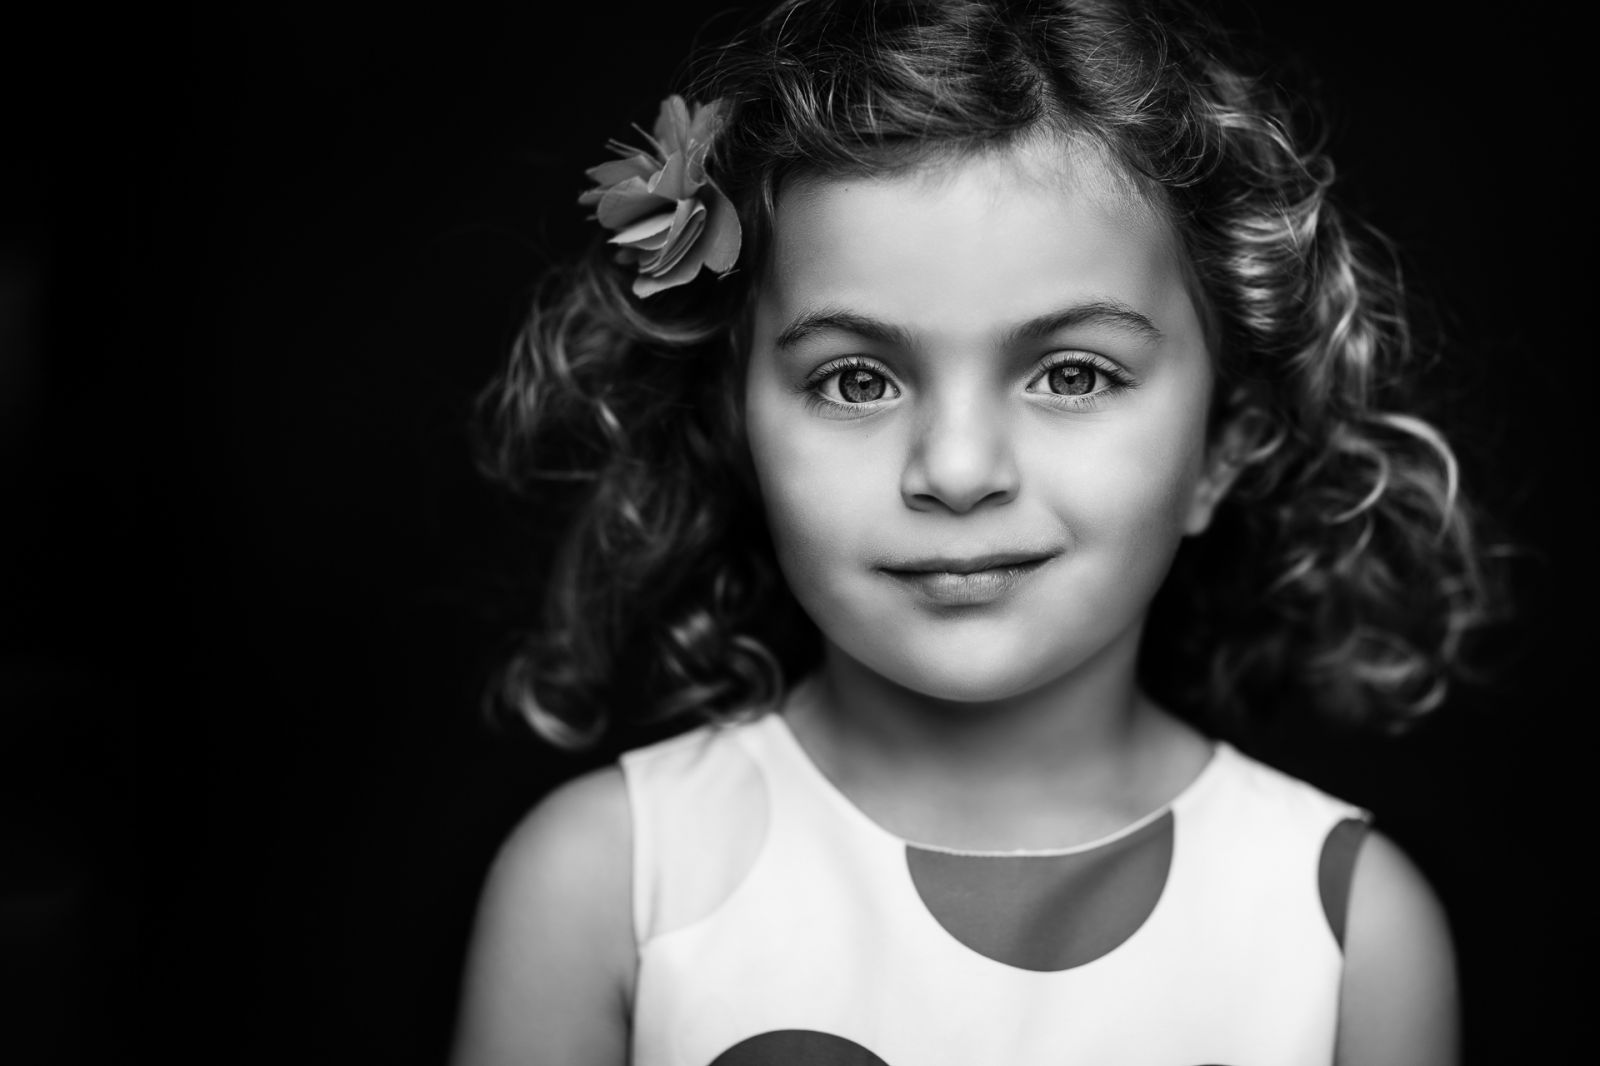 Young Girl black and white portrait